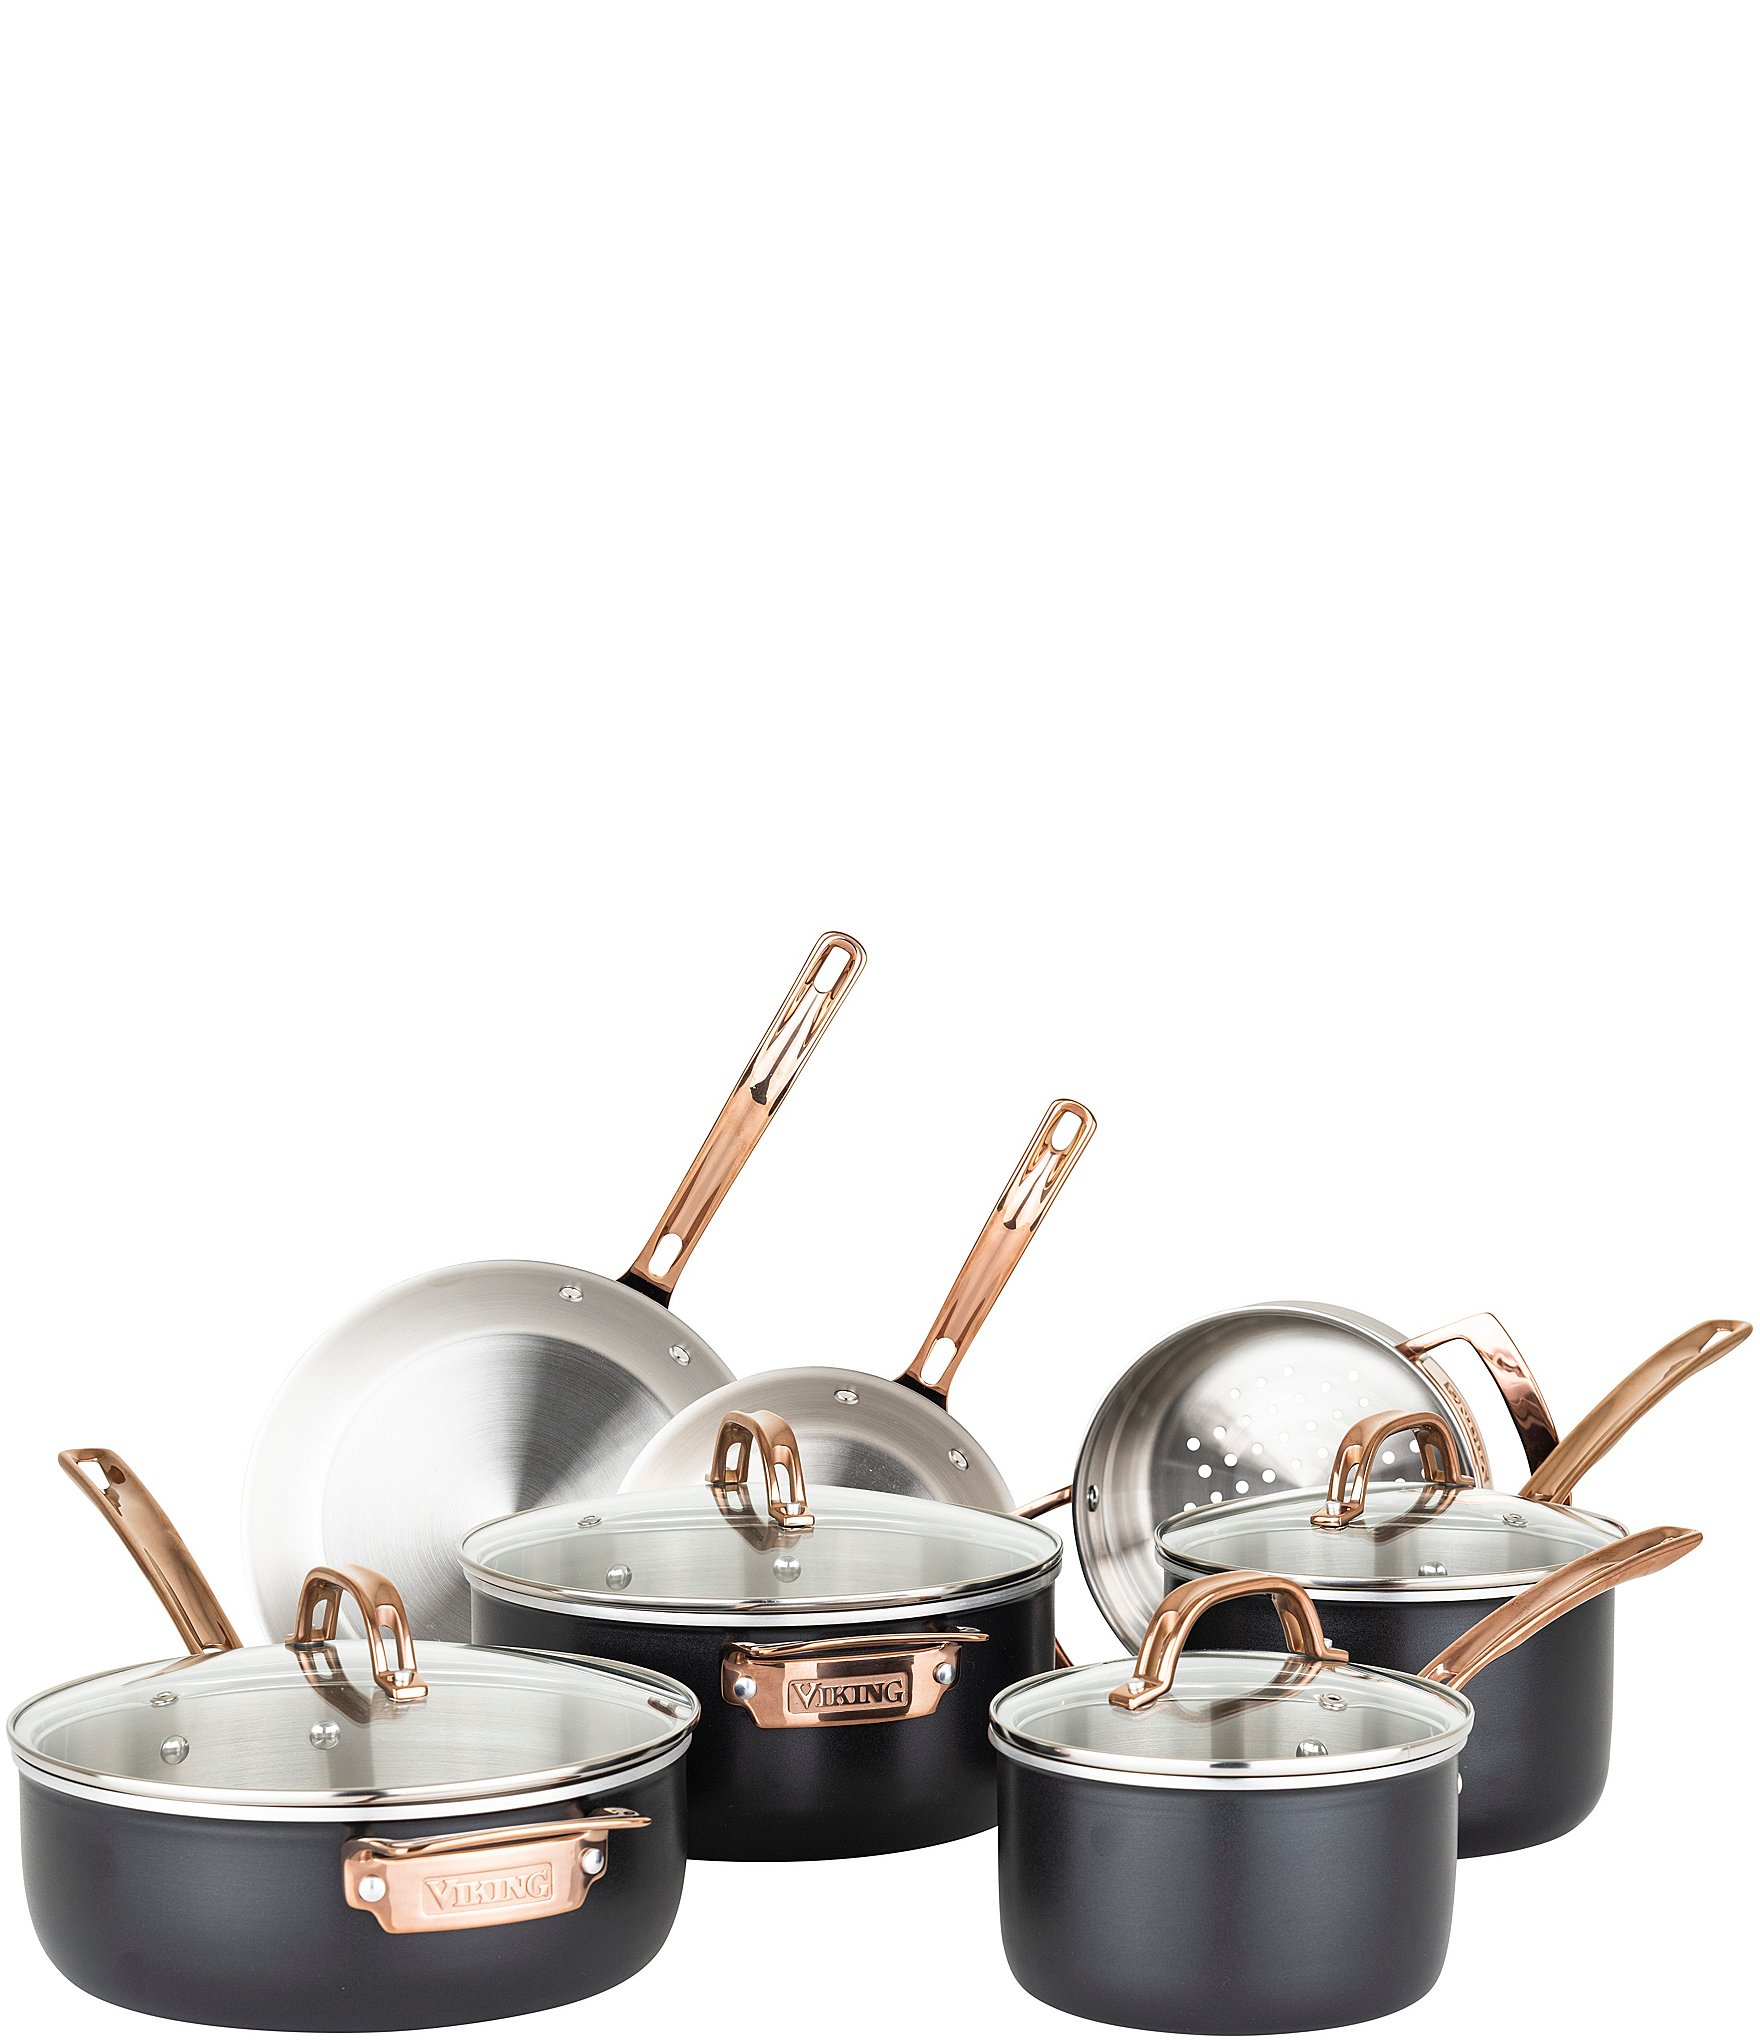 Viking 3-Ply Black and Copper Saucepan with Glass Lid - 2 qt.